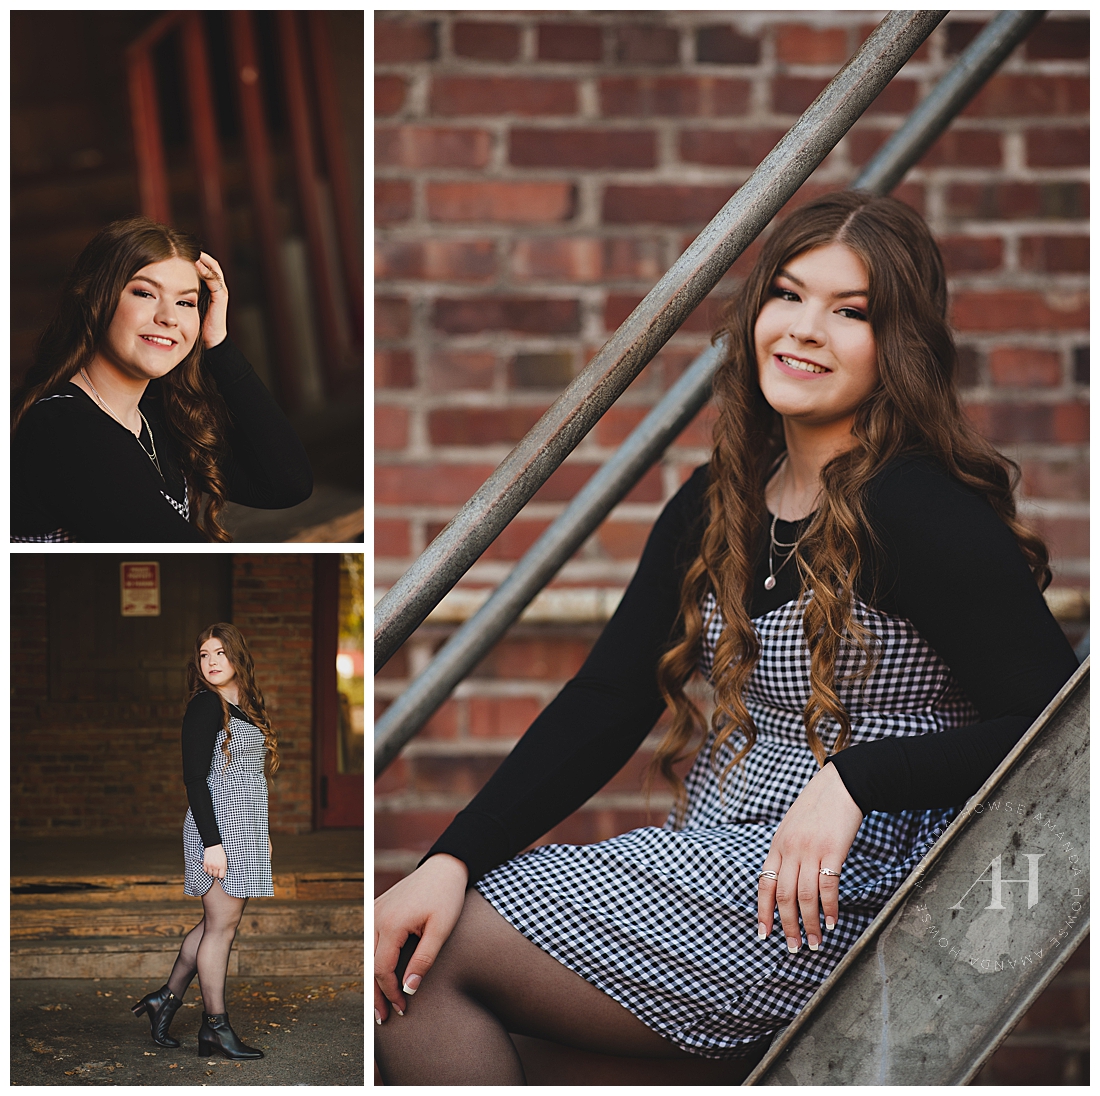 Downtown Sumner Senior Portraits | Senior Girl Posing on Metal Staircase with Exposed Brick | Photographed by the Best Tacoma Senior Photographer Amanda Howse